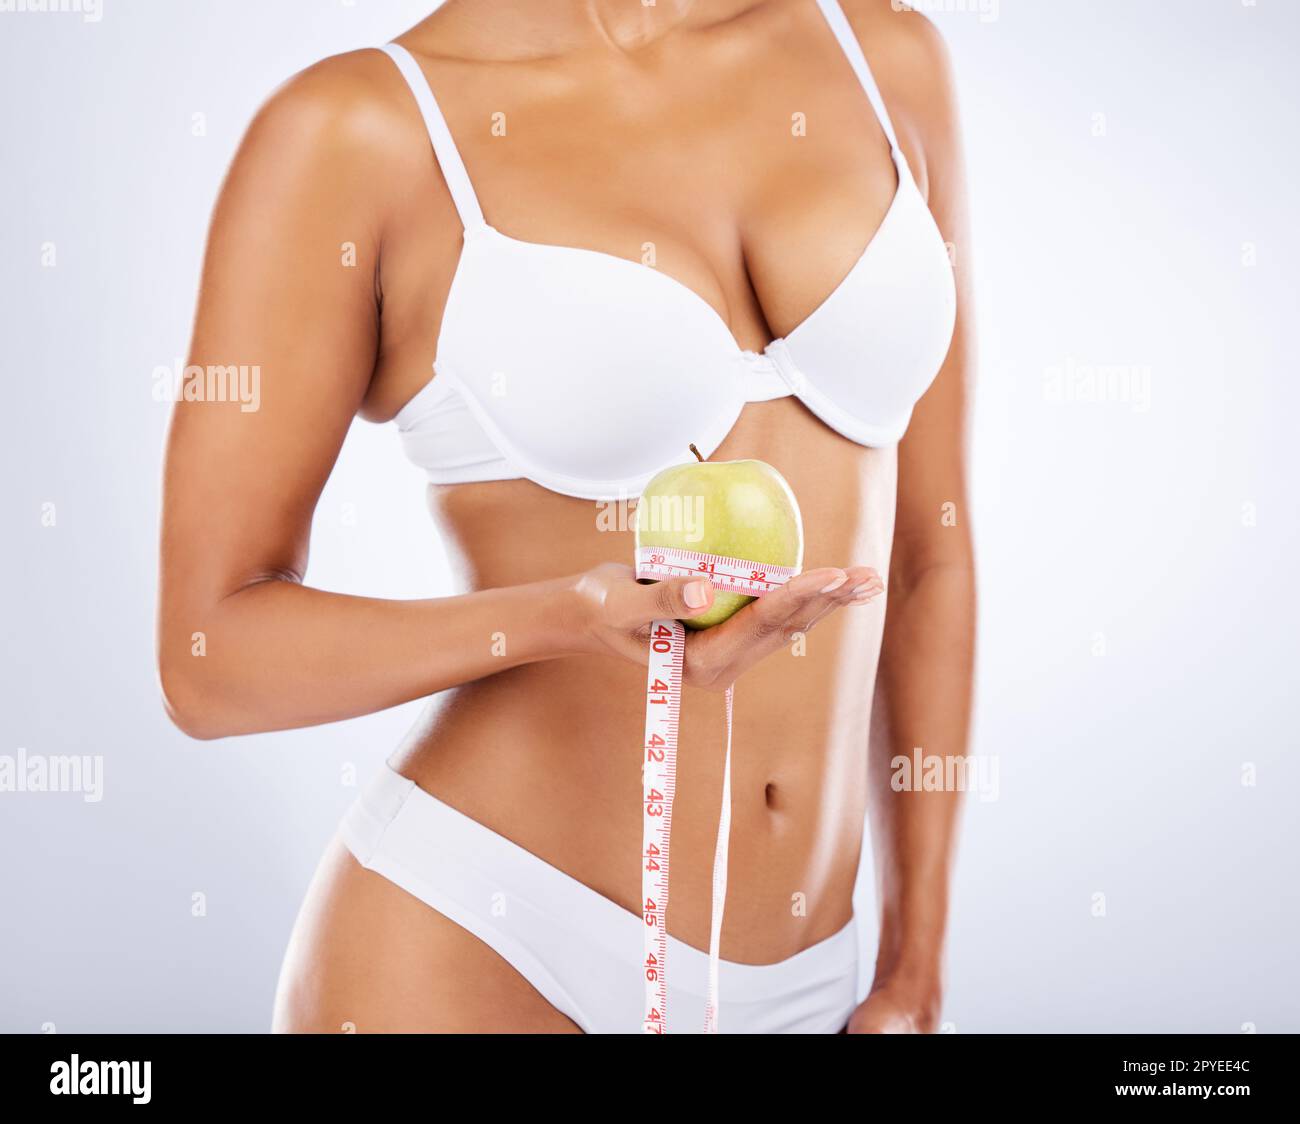 Apple, health and body with woman and fitness, diet and measuring tape with weightloss, detox and fruit against white studio background. Fiber, healthy lifestyle and skin with stomach and underwear. Stock Photo